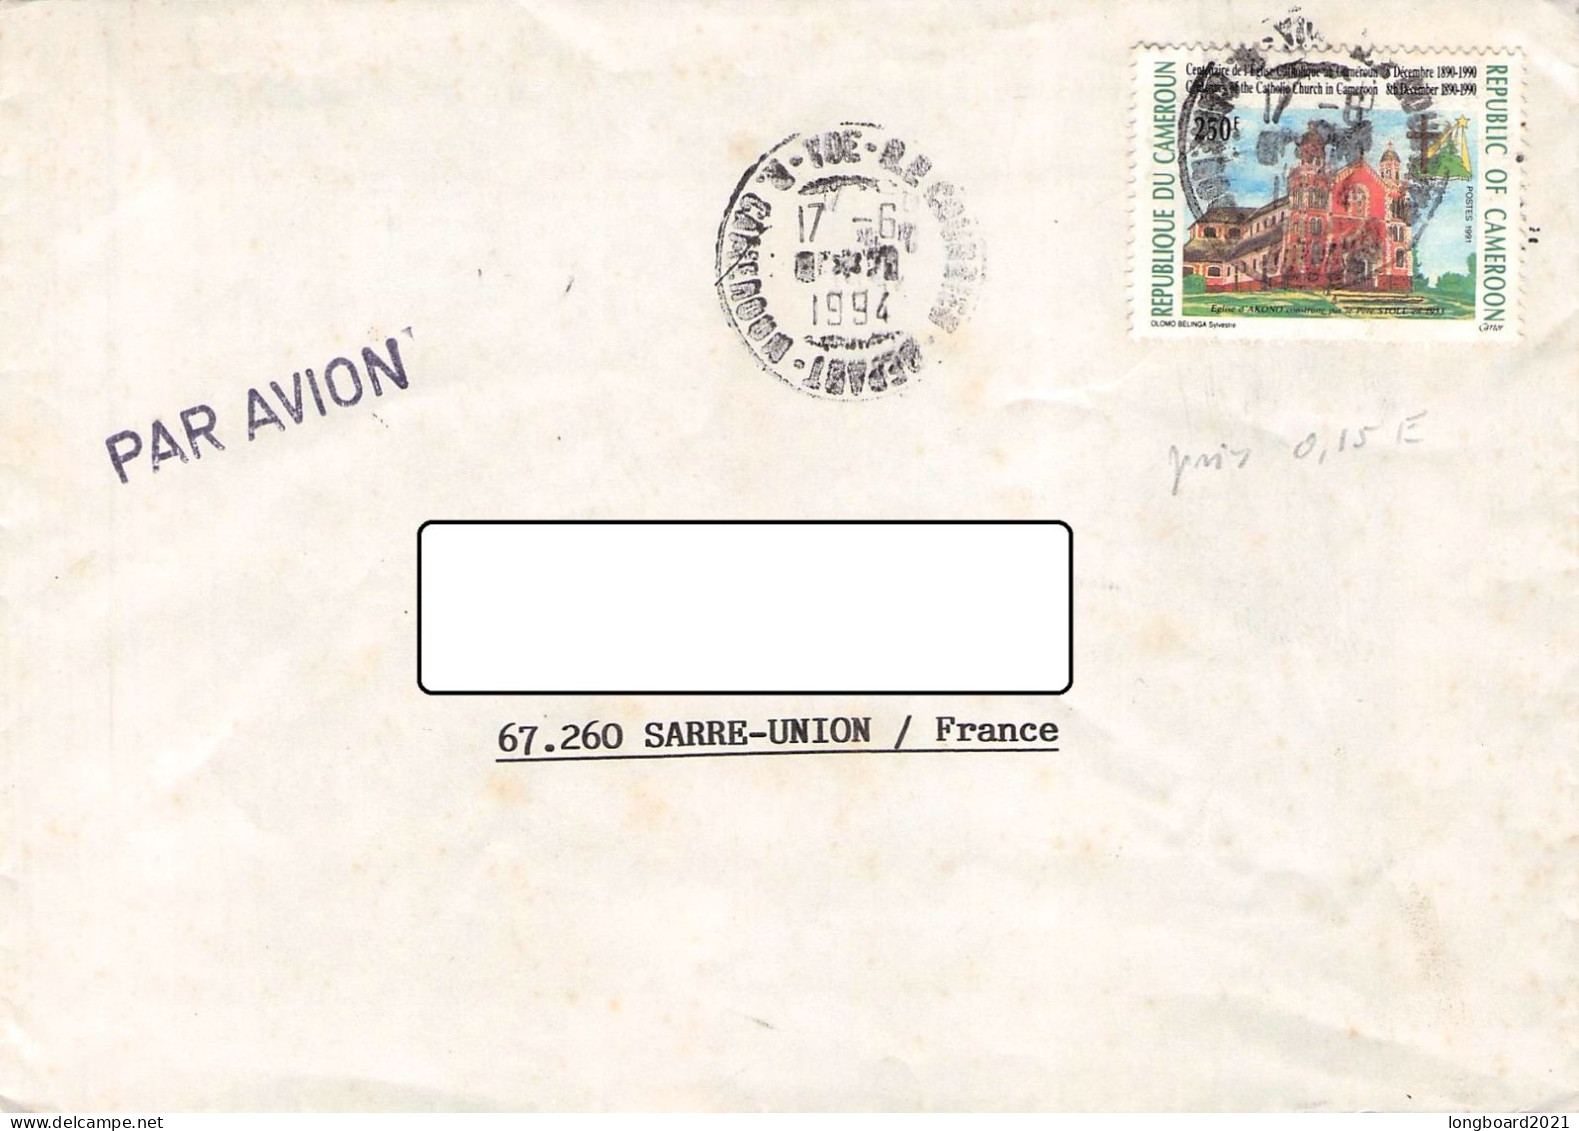 CAMEROON - AIRMAIL 1994 - SARRE UNION/FR /4518 - Cameroon (1960-...)